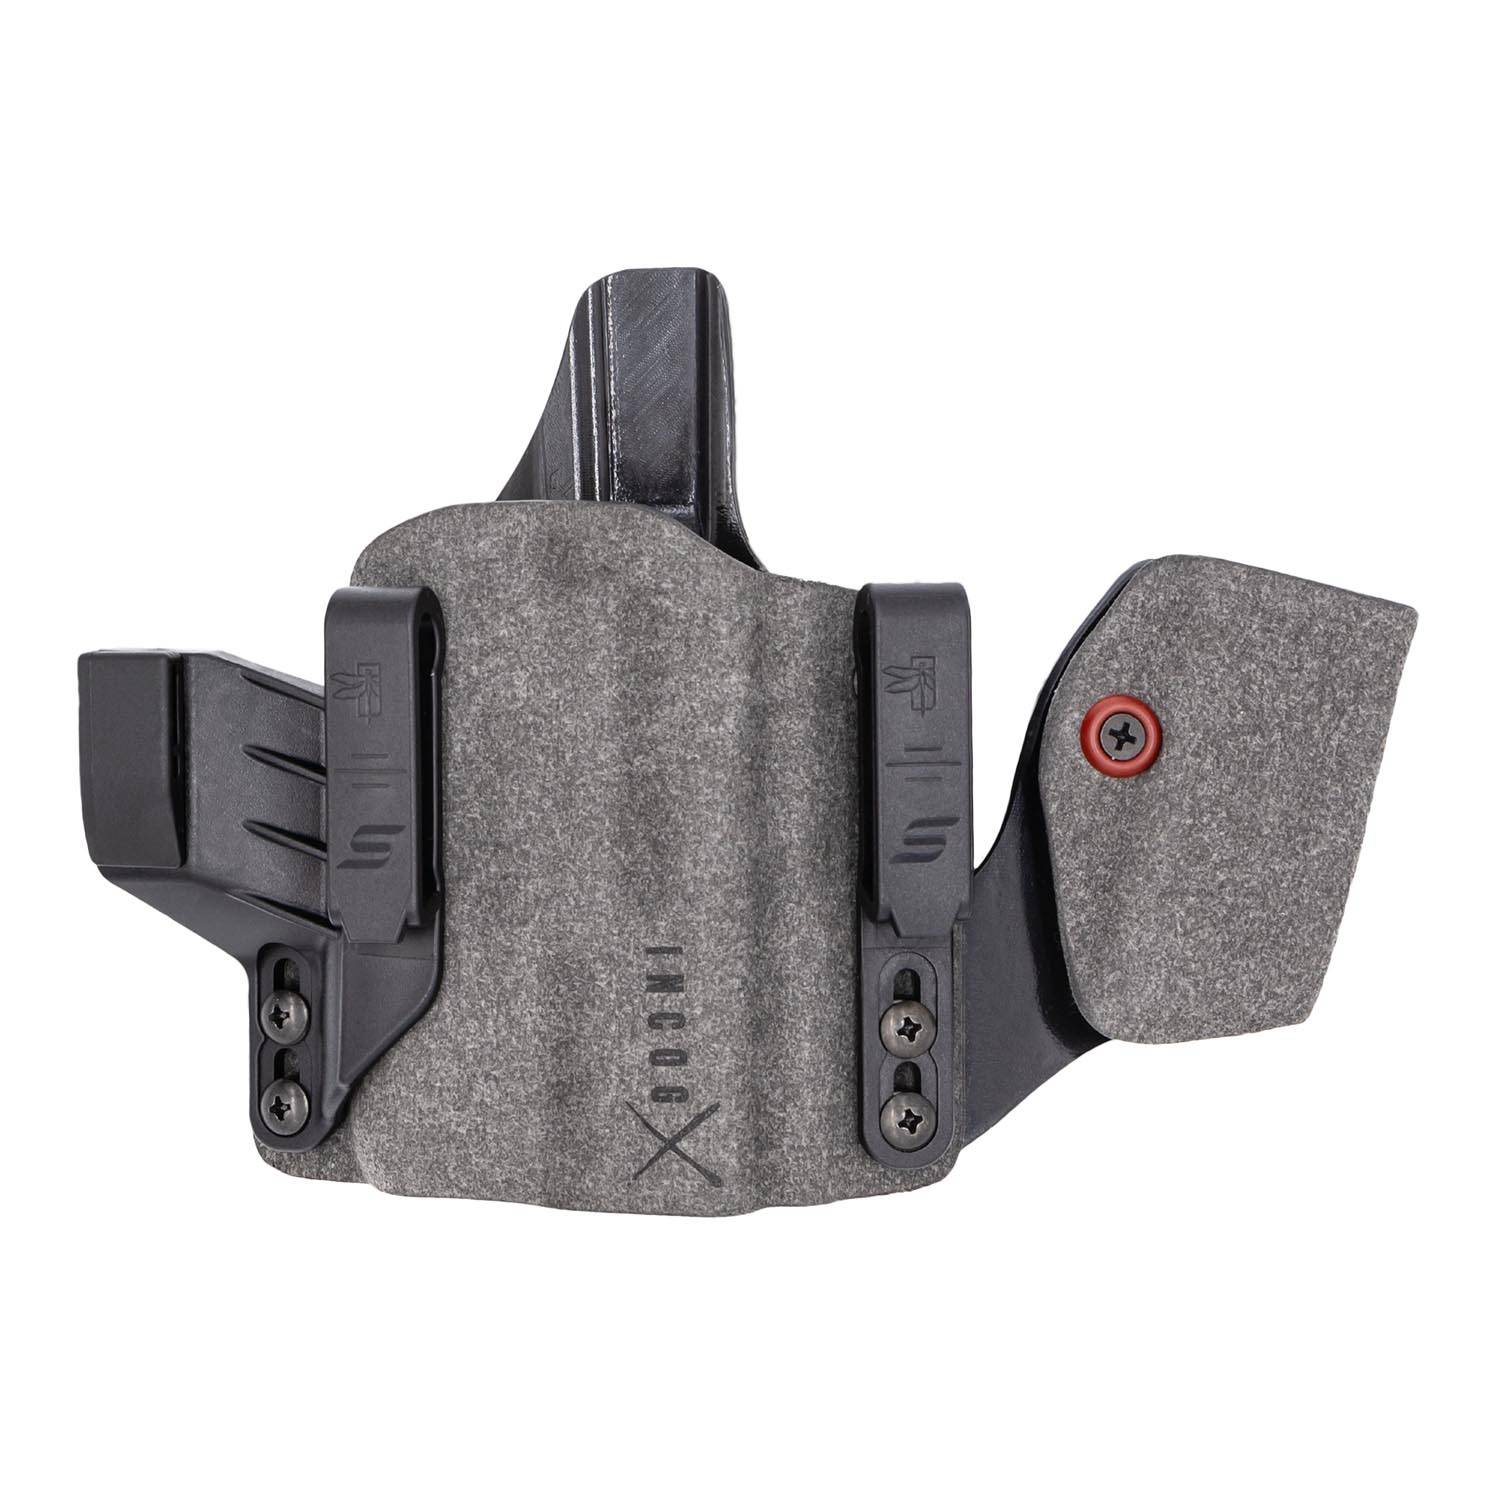 Safariland INCOG X IWB RDS Holster with Mag Caddy